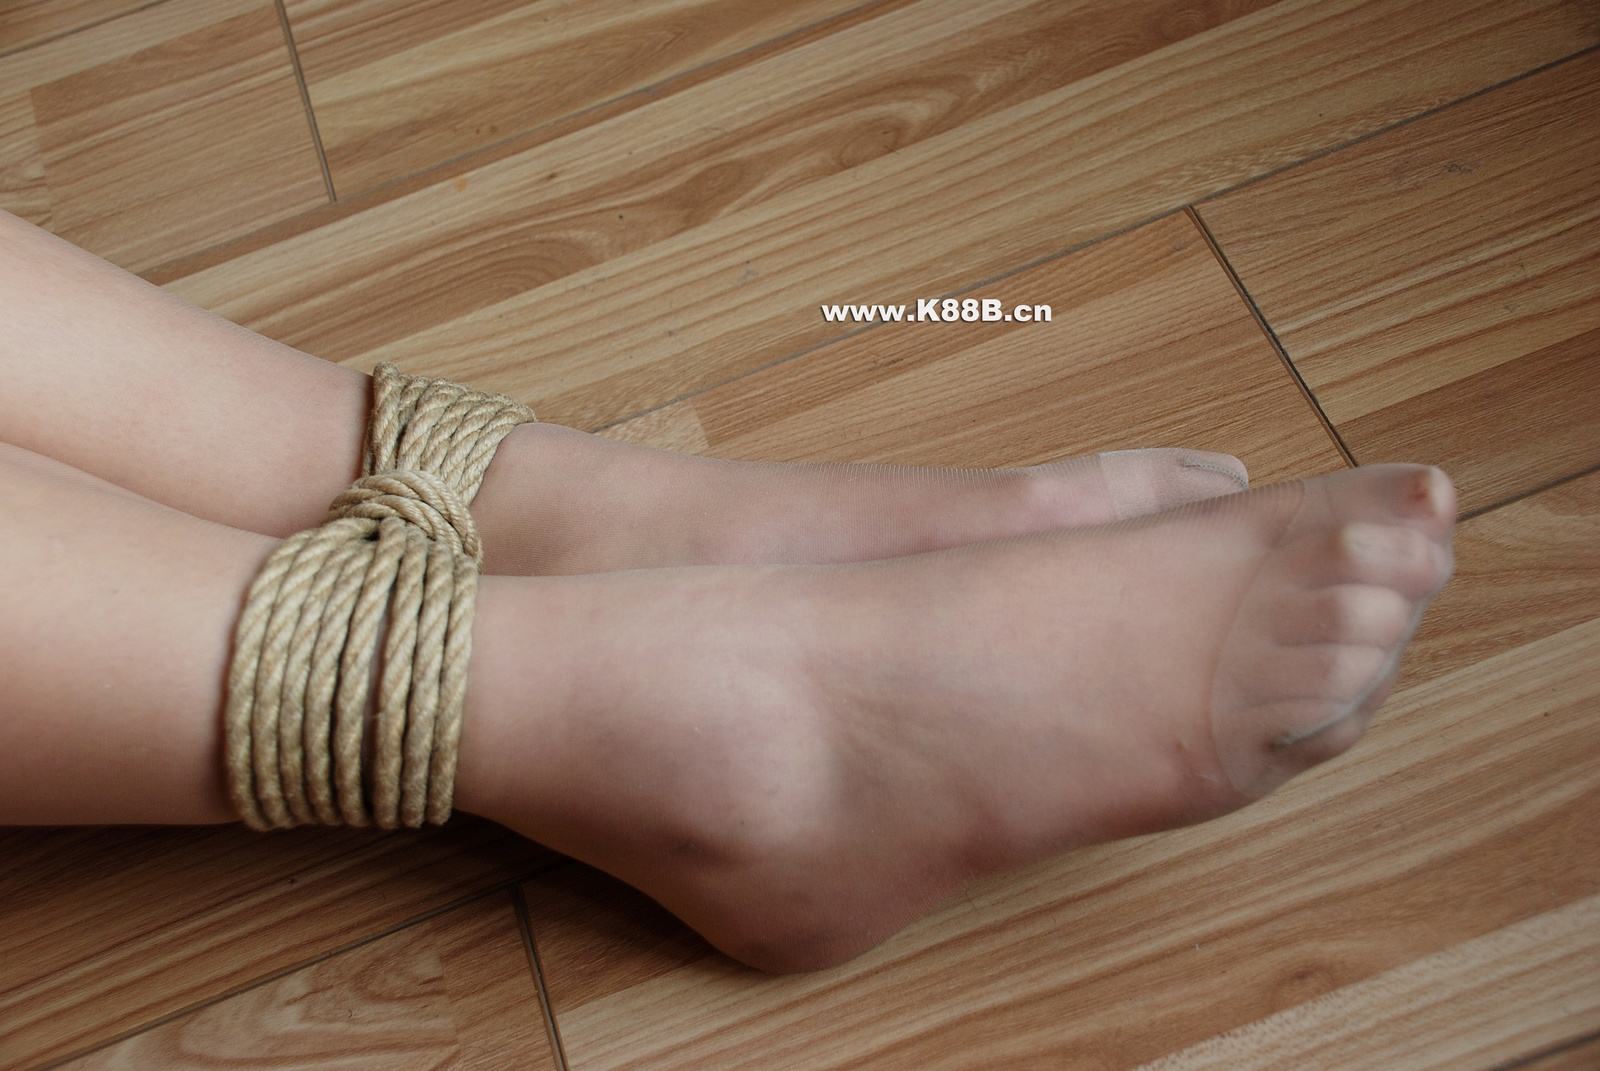 Chinese Rope Model 442